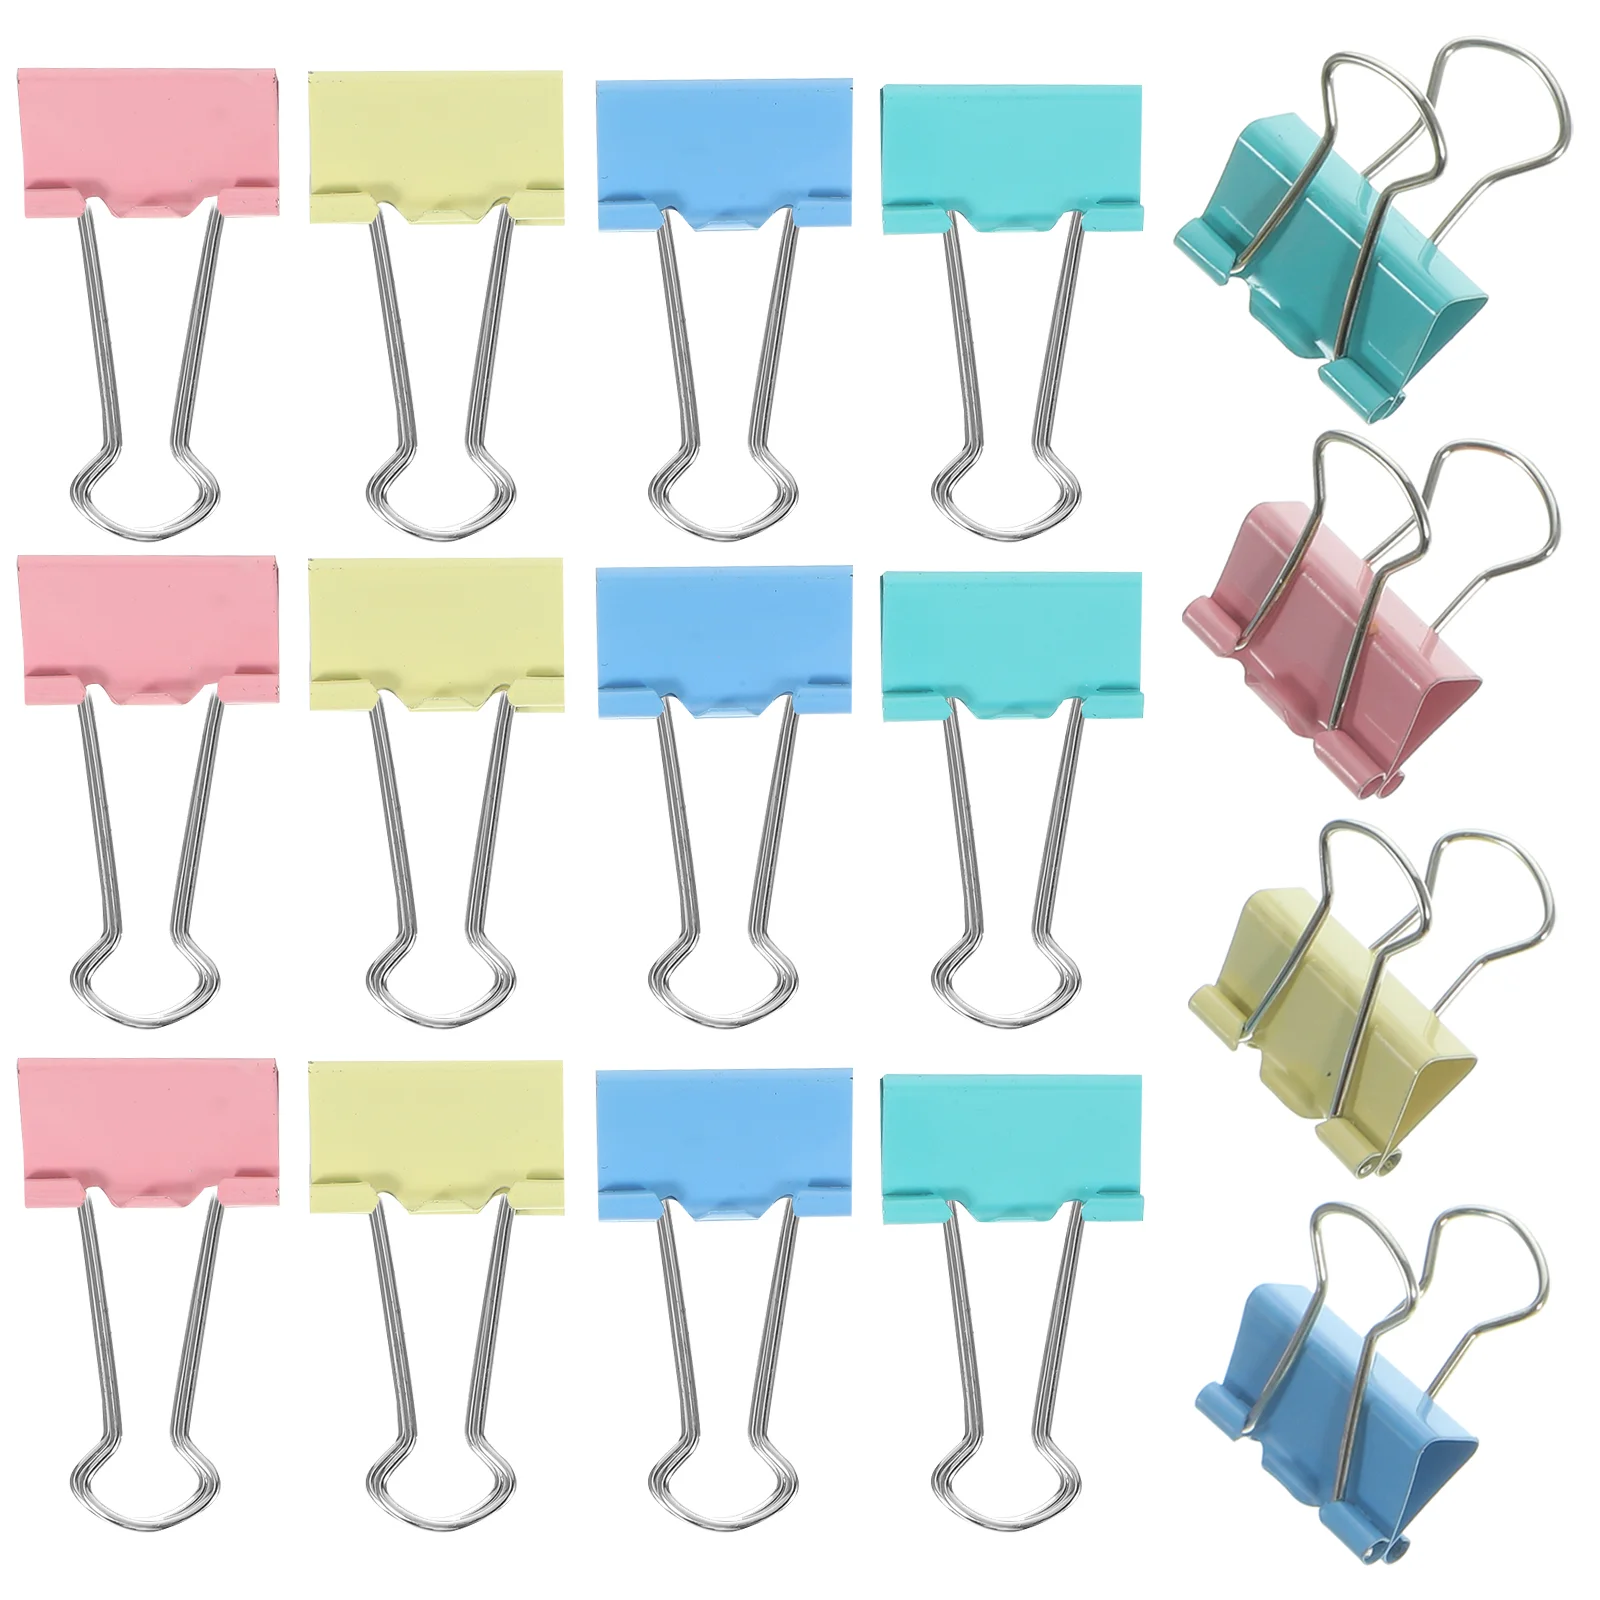 

48Pcs Mini Binder Clips File Paper Clips Office Document Clips File Organize Clips Practical Binder Clips